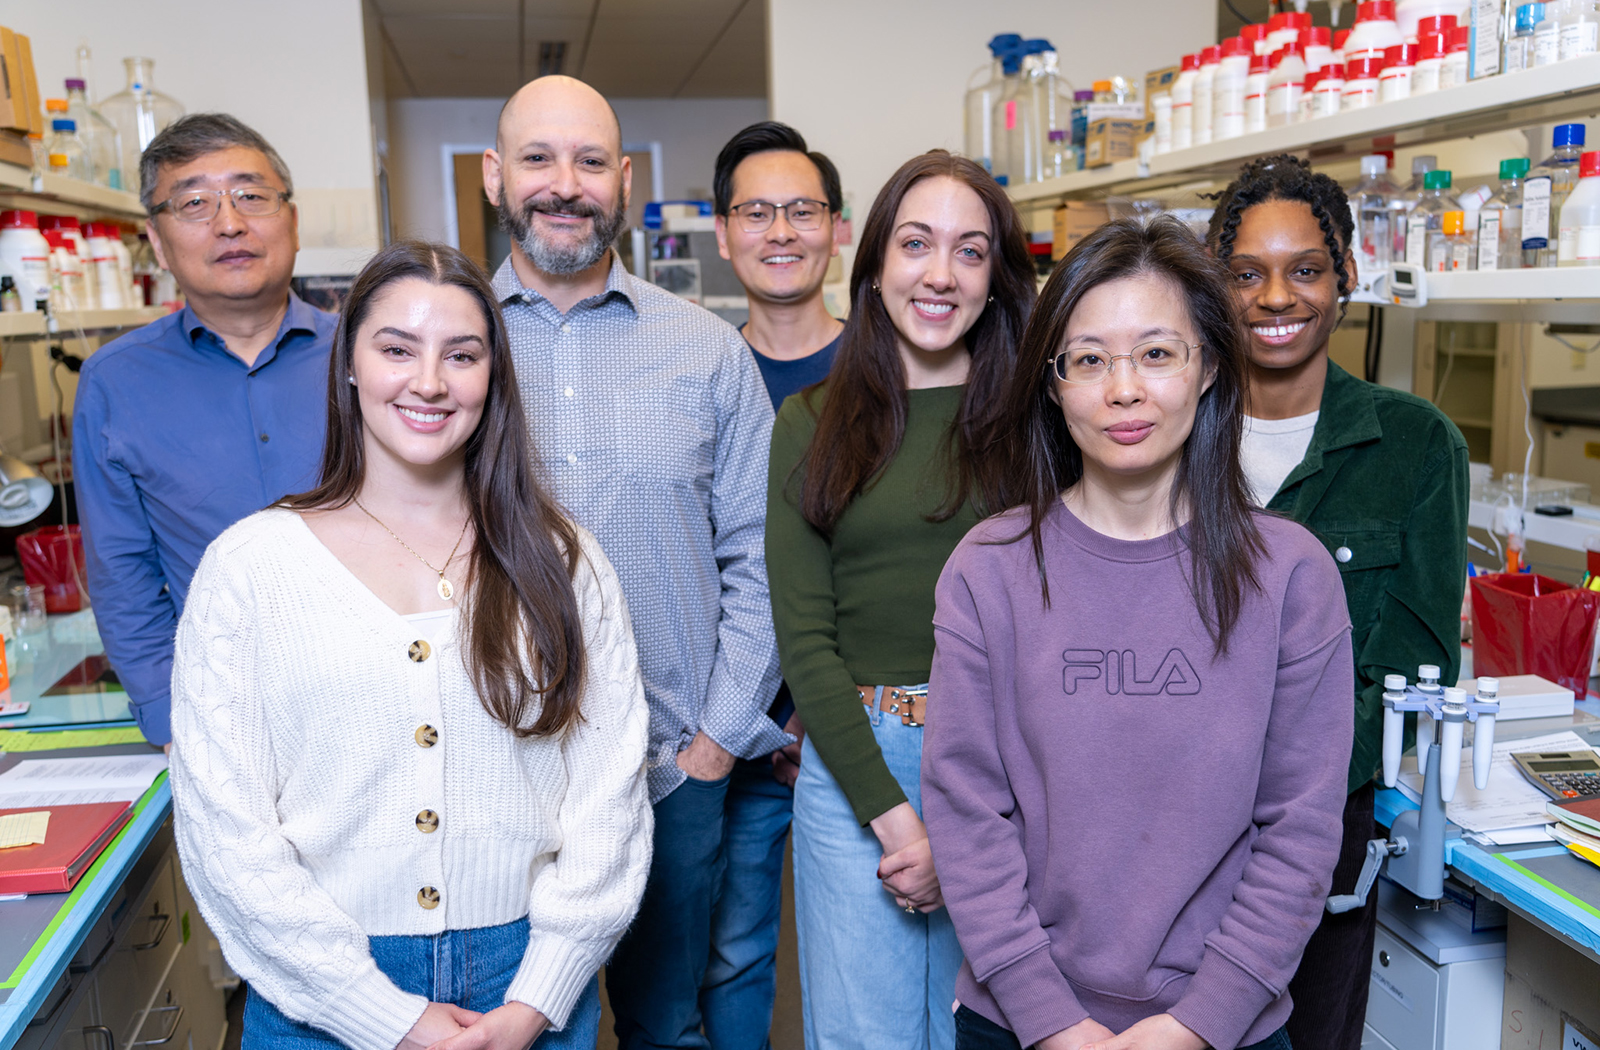 Drs. Qiu and Lifshitz (back left) with members of their respective research teams (from left to right) Brenda Lujan, MS, a CTS graduate student, Xiaokuang Ma, a postdoctoral researcher, Katherine R. Giordano, a postdoctoral researcher, Jing Wei, a research scientist, and Kyli A. McQueen, a post-baccalaureate student